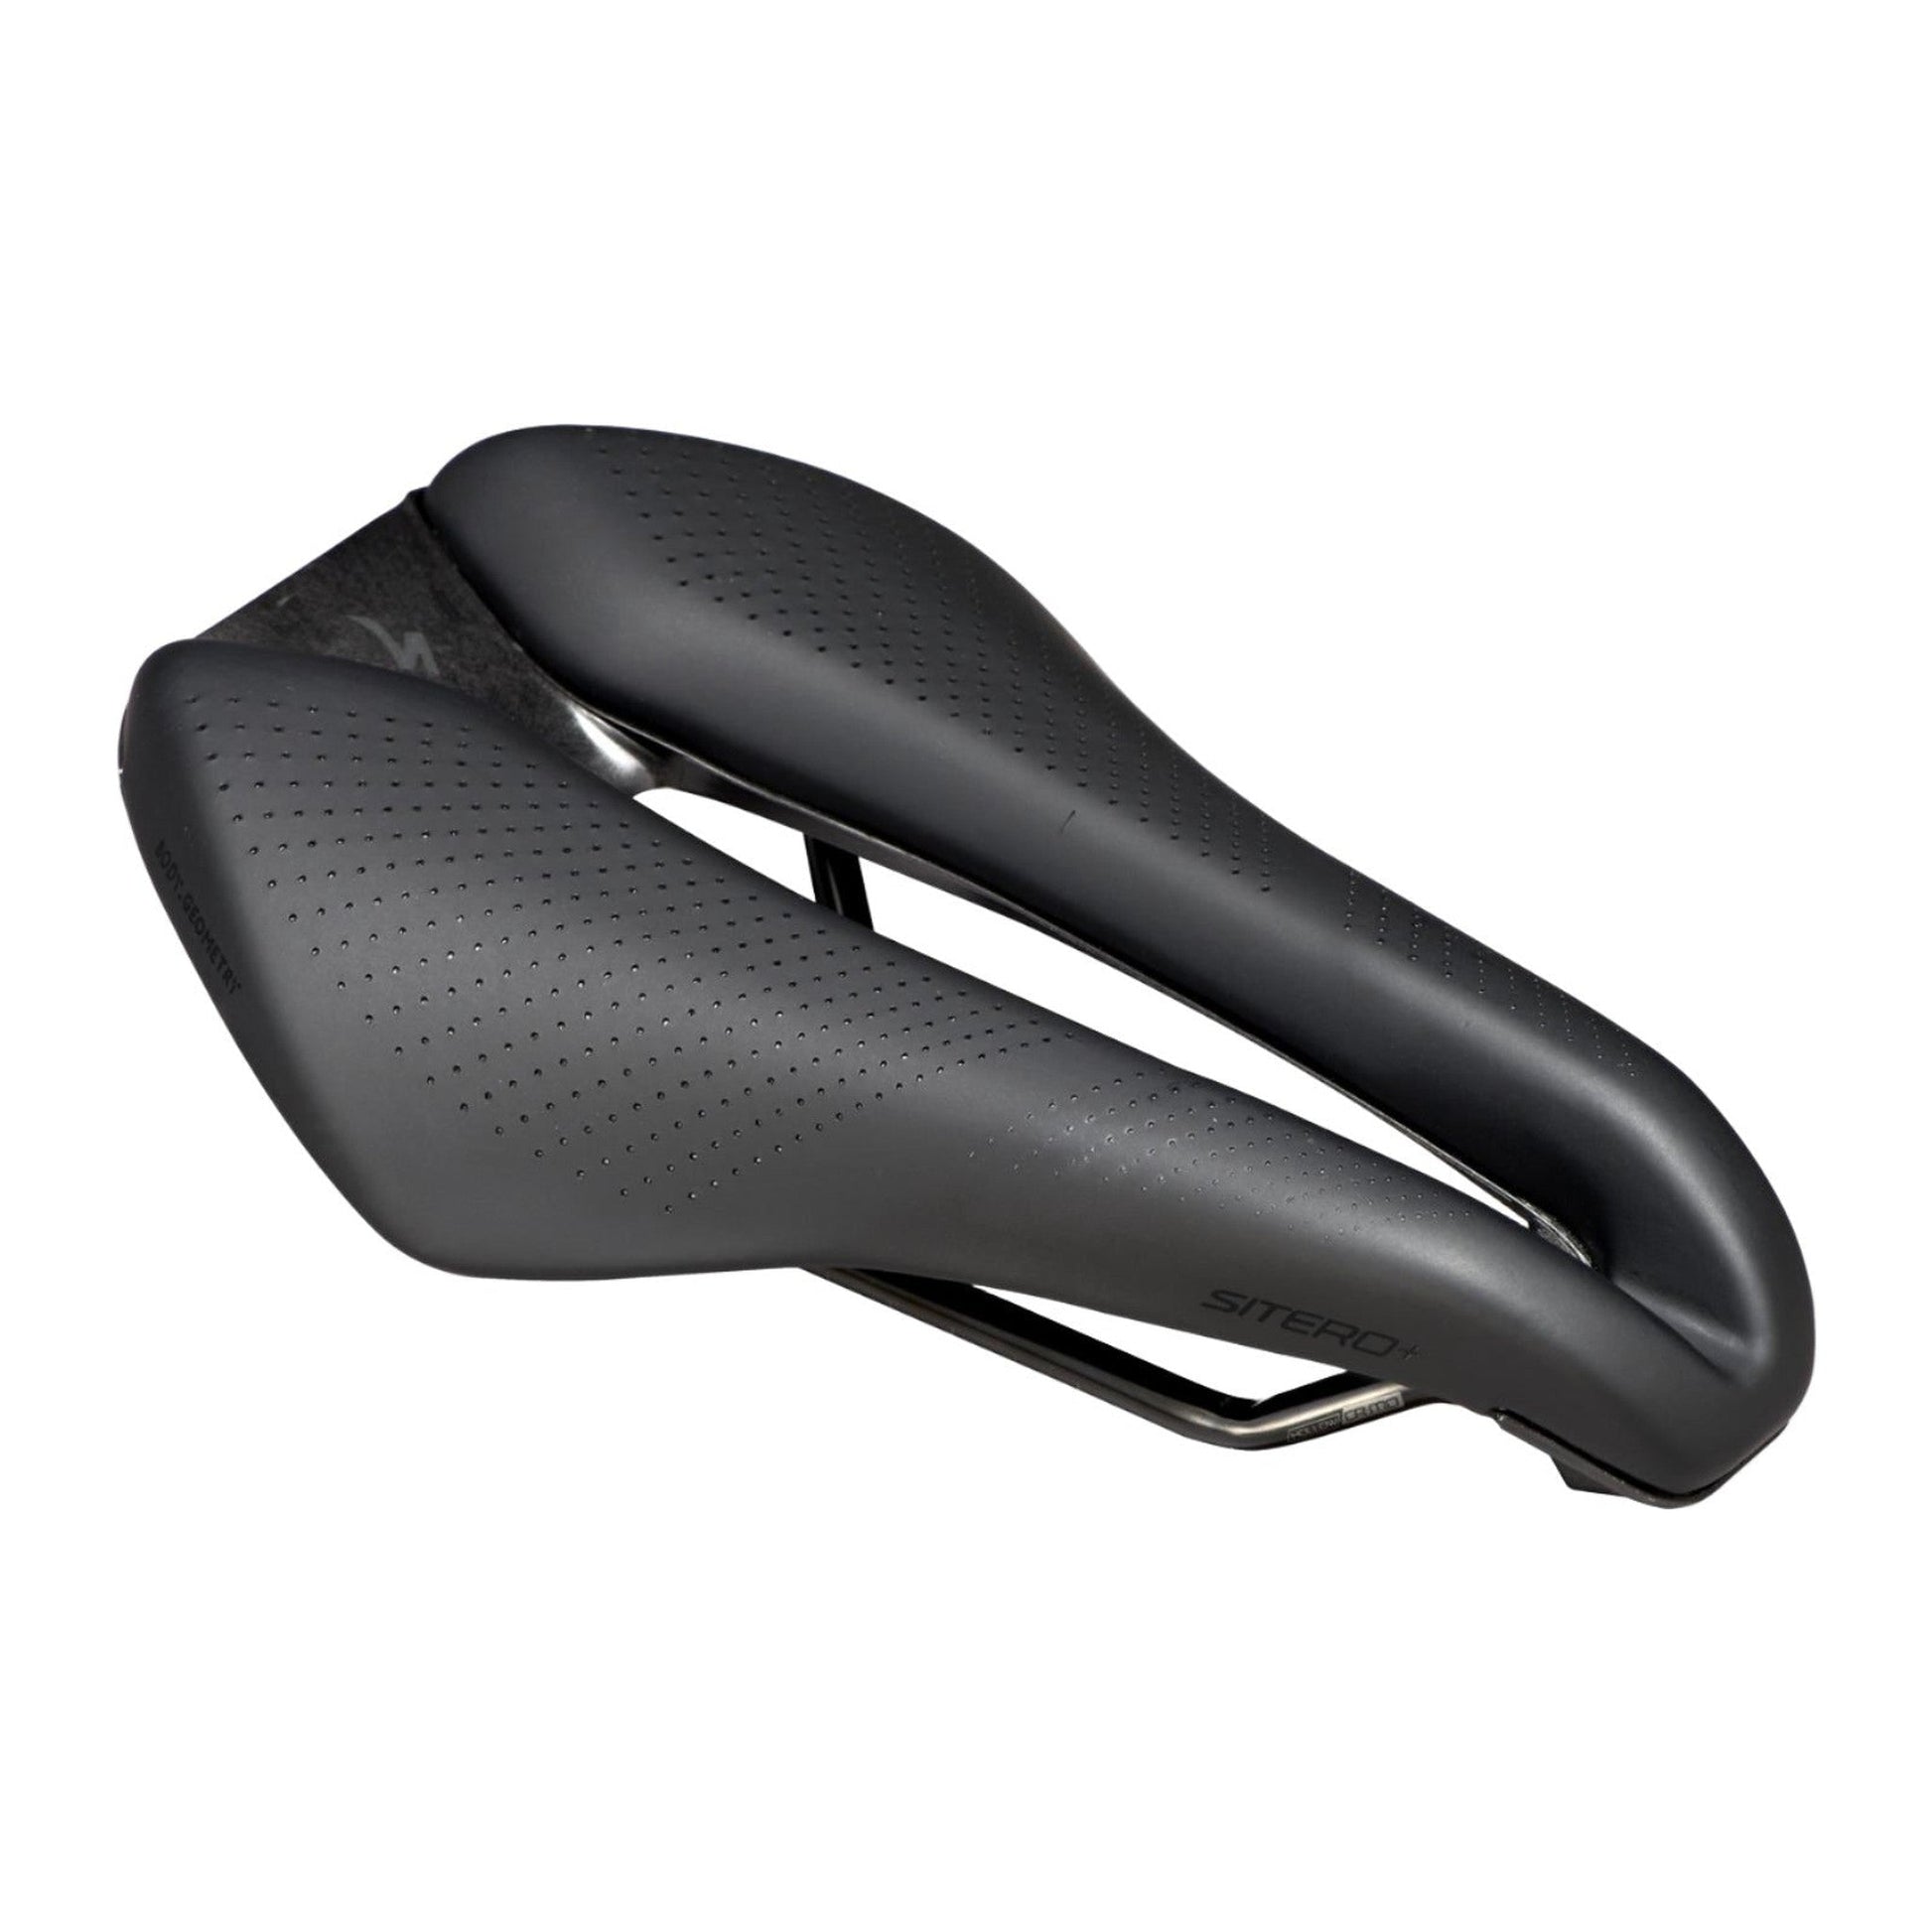 Sitero Plus Saddle Saddle | Complete Cyclist - Designed with our Retül fit specialists, doctors, and engineers, the Sitero Plus is the best-fitting saddle for aerodynamic time trial positions. A wide channel, progressive shape, level 3 padding and multiple width options provide optimal comfort and support for long distance rides in an aerodynamic position.